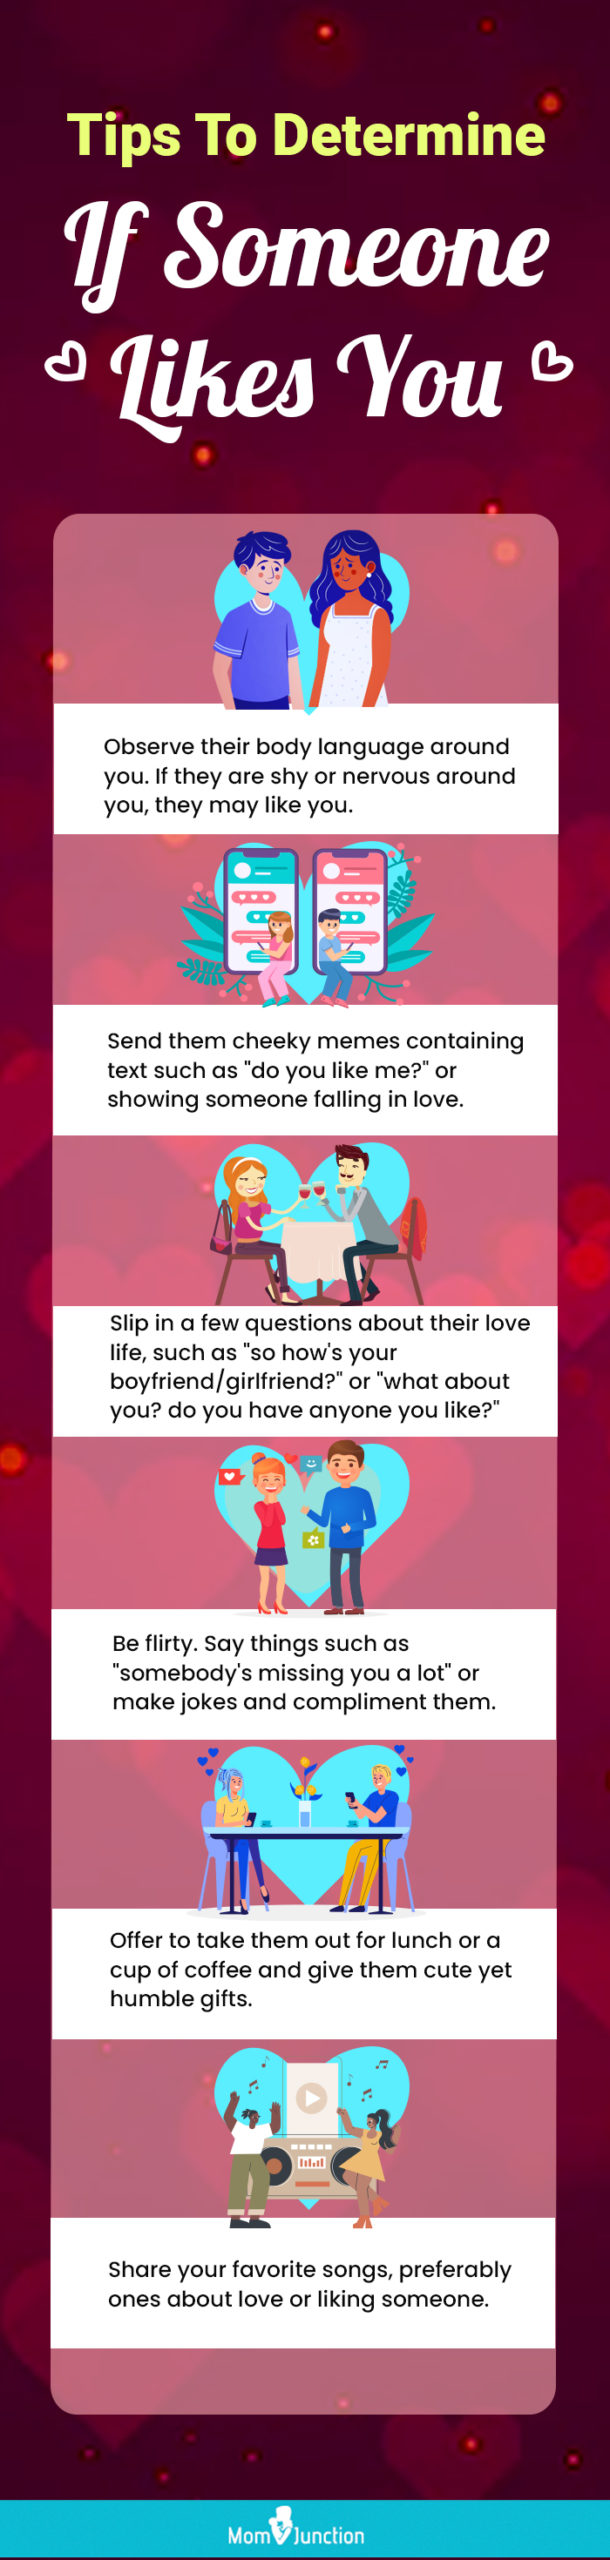 tips to determine if someone likes you (infographic)